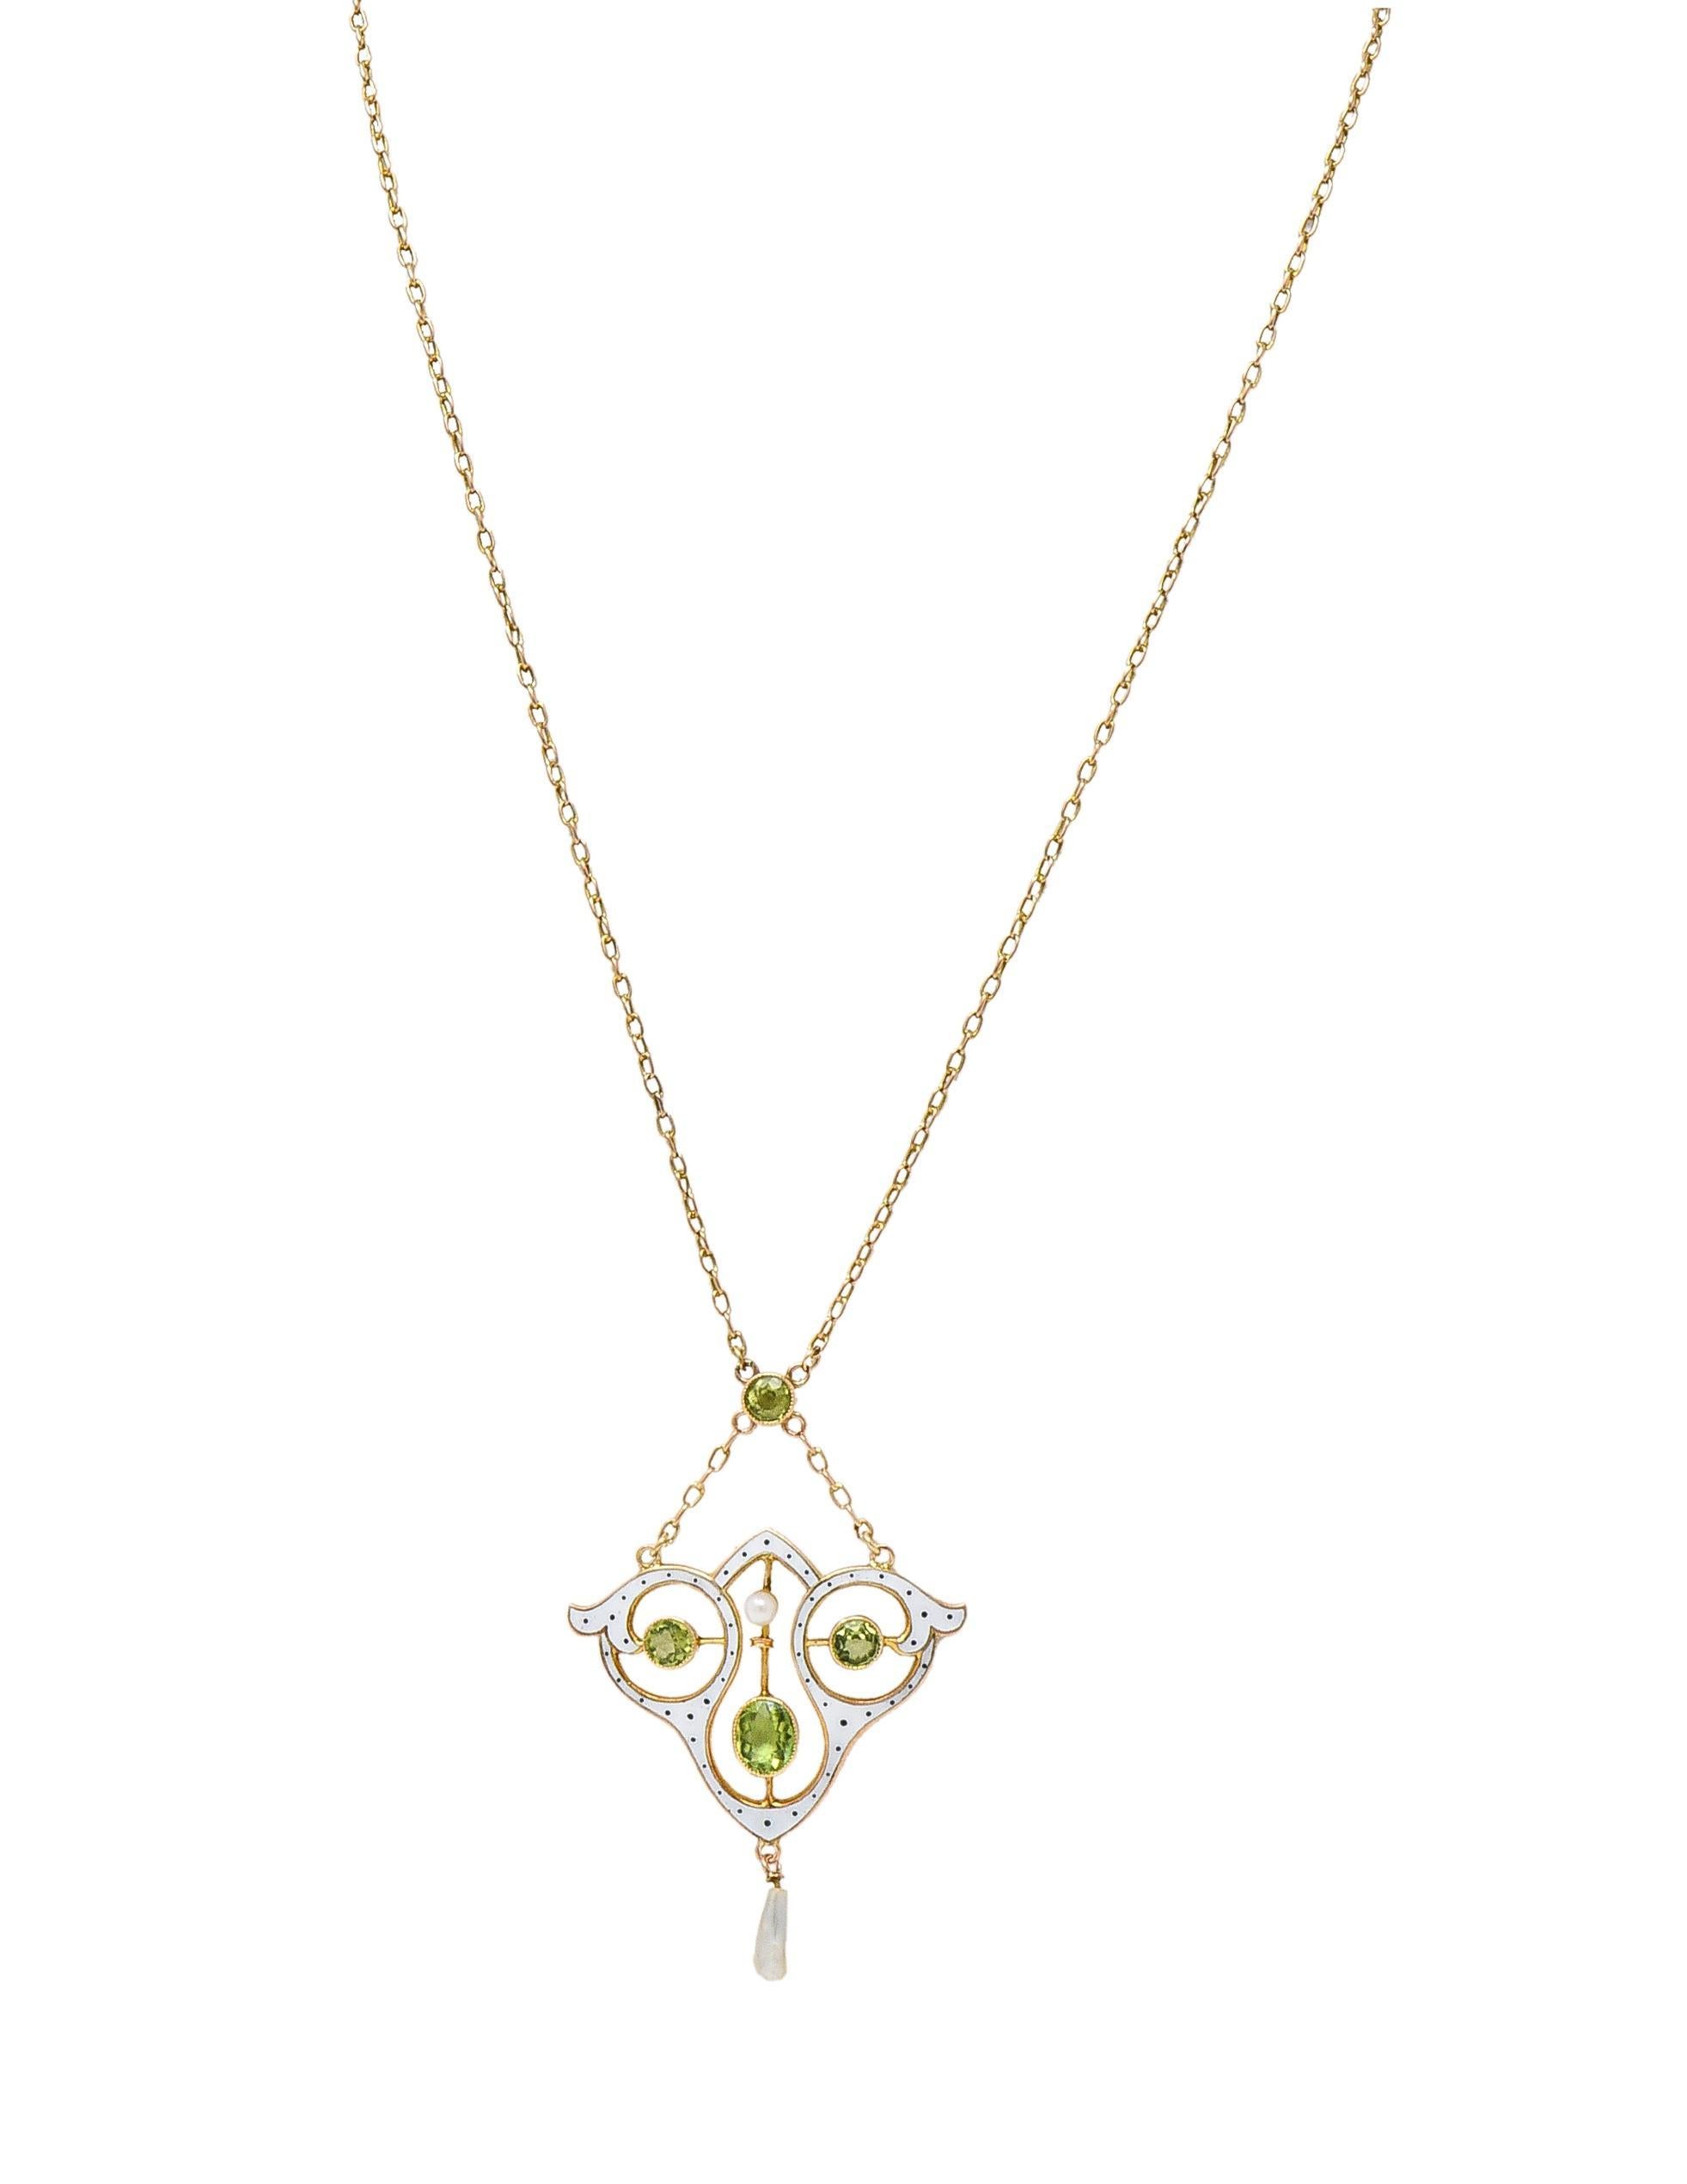 Designed as a cable link chain centering a lavalier-style surmount and drop pendant 
Featuring round and oval cut peridot bezel set throughout 
Transparent light green and weighing approximately 1.82 carats total
With a pierced whiplash motif